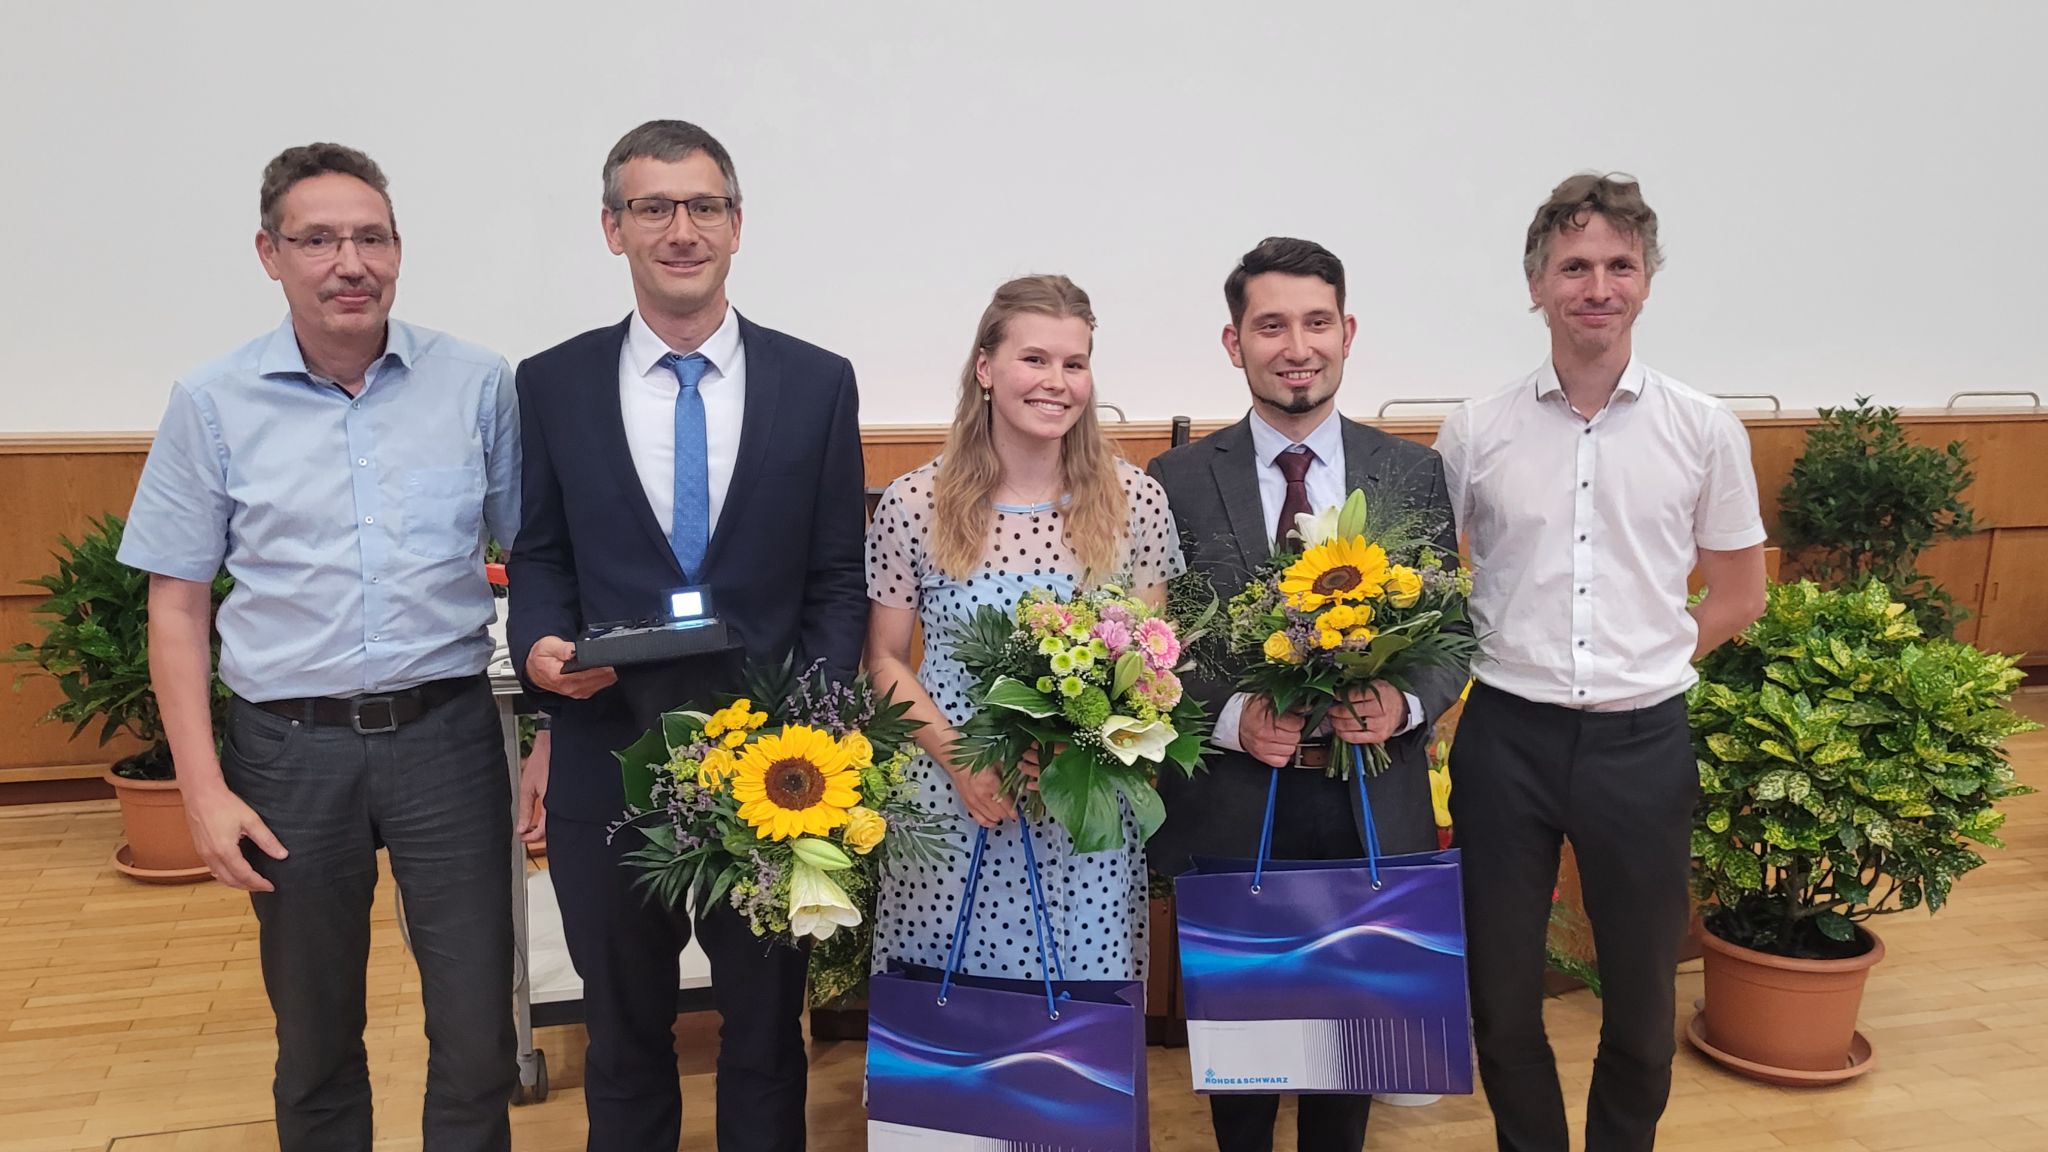 Dr. Martin Landmann (second from left) at the award ceremony for the Dr.-Ing. Siegfried Werth Prize 2023.